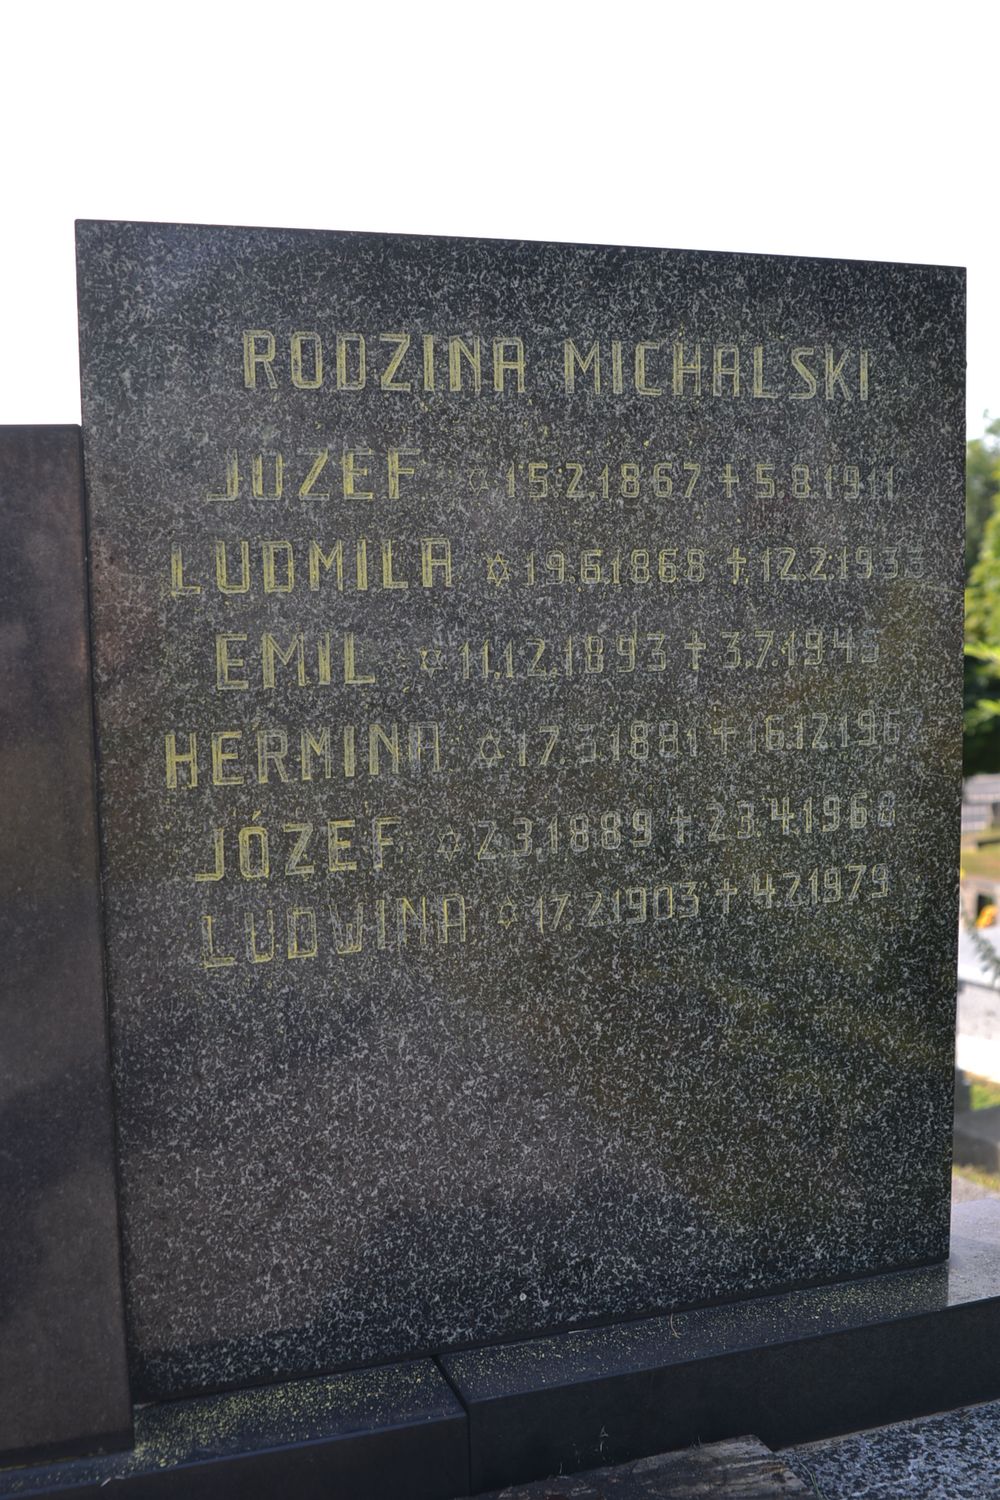 Inscription plaque of the tomb of the Michalski family, cemetery in Karviná Doły, Czech Republic, as of 2022